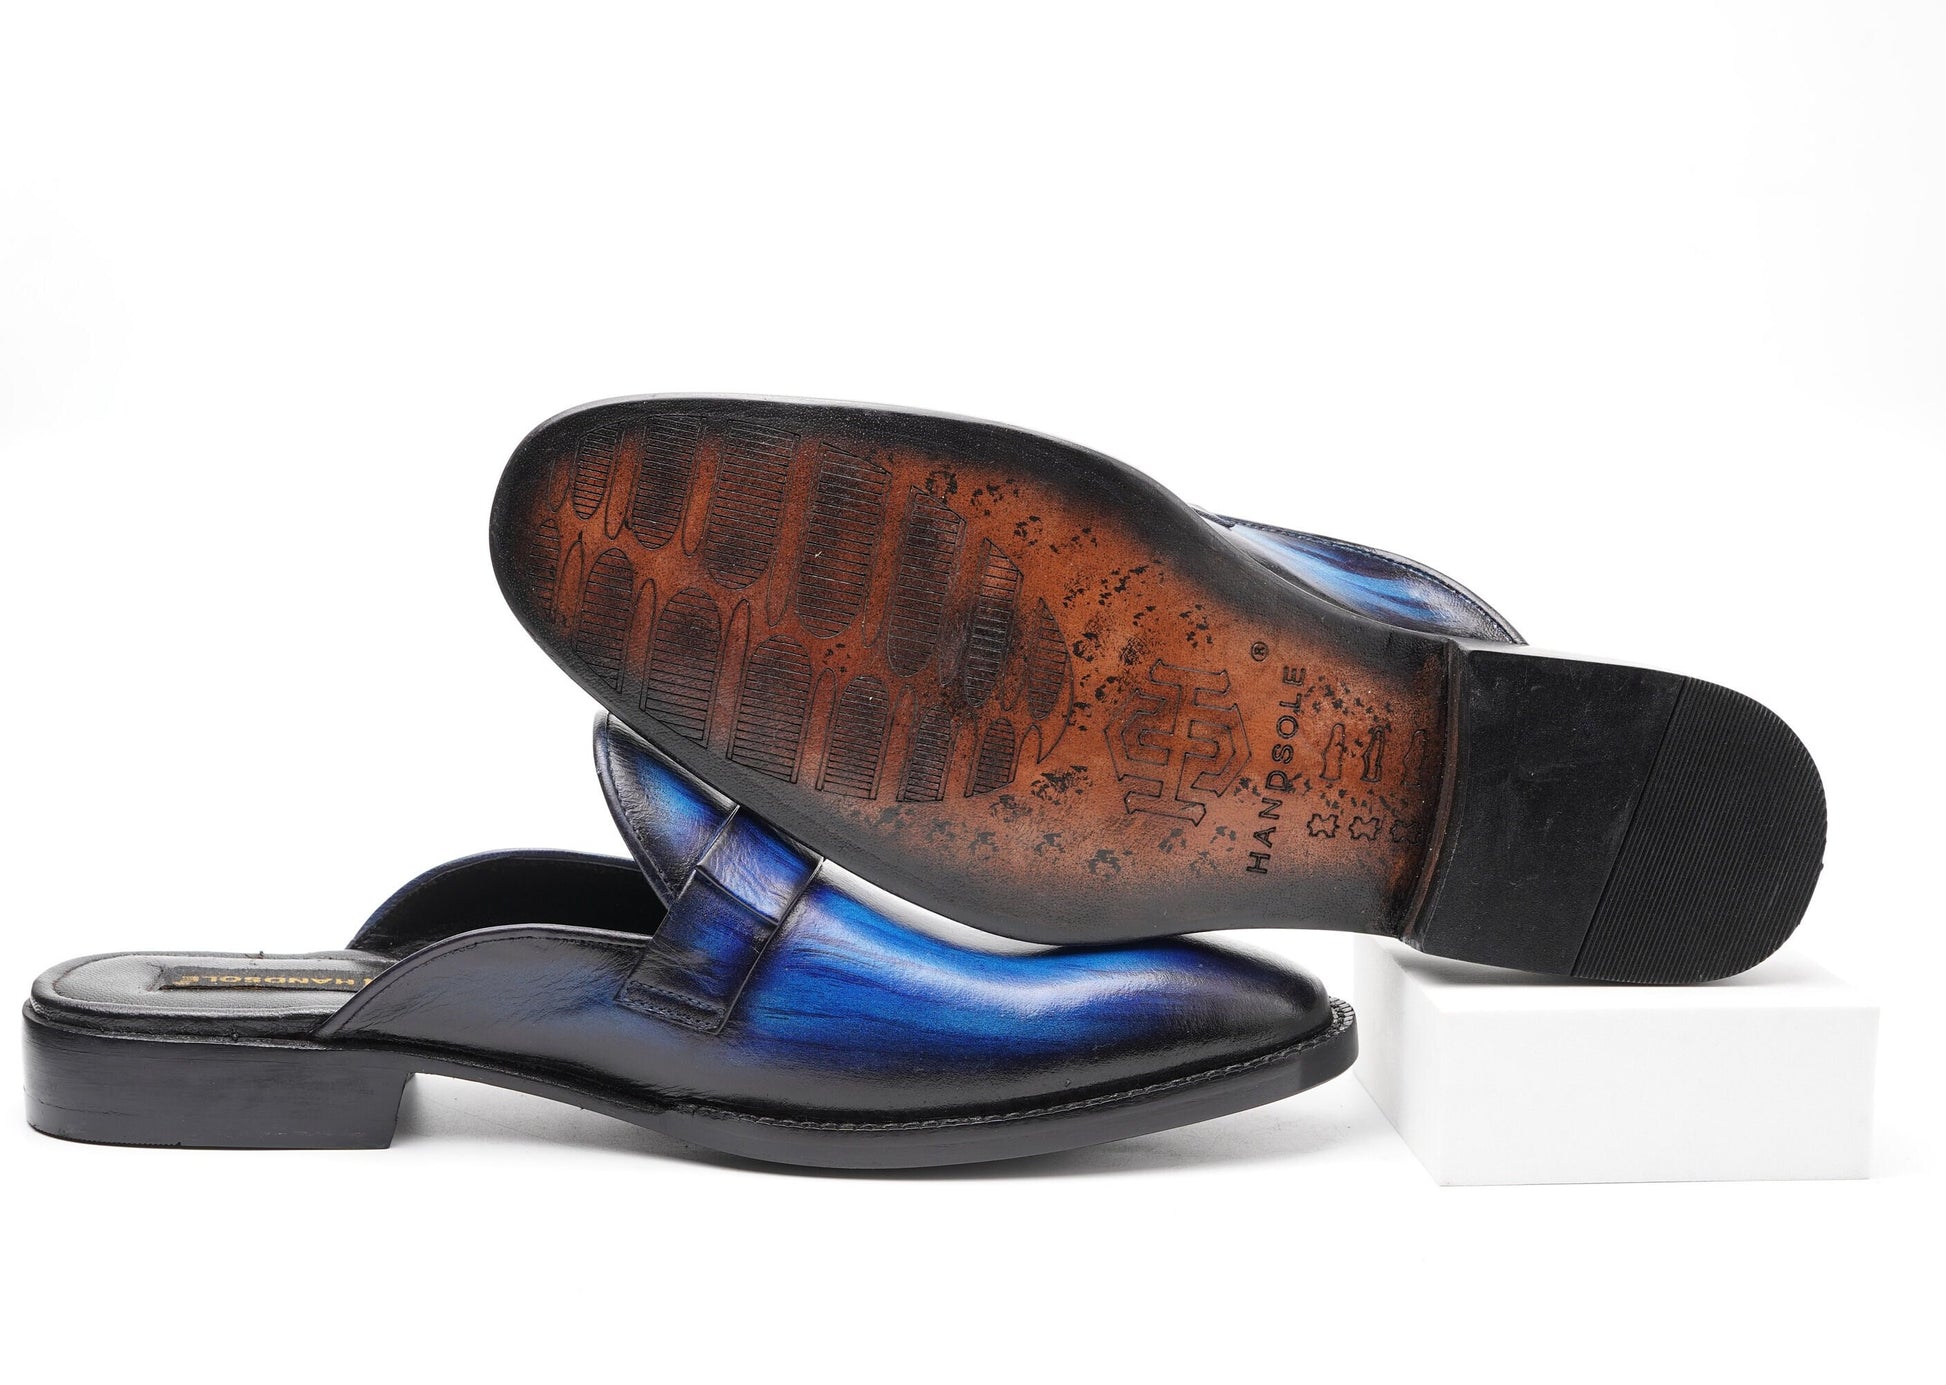 One Piece Royal Blue With Bow backless loafer Slip On Mule Custom Made-To-Order Shoes Premium Quality Handmade With Patina Finish Woozy Store